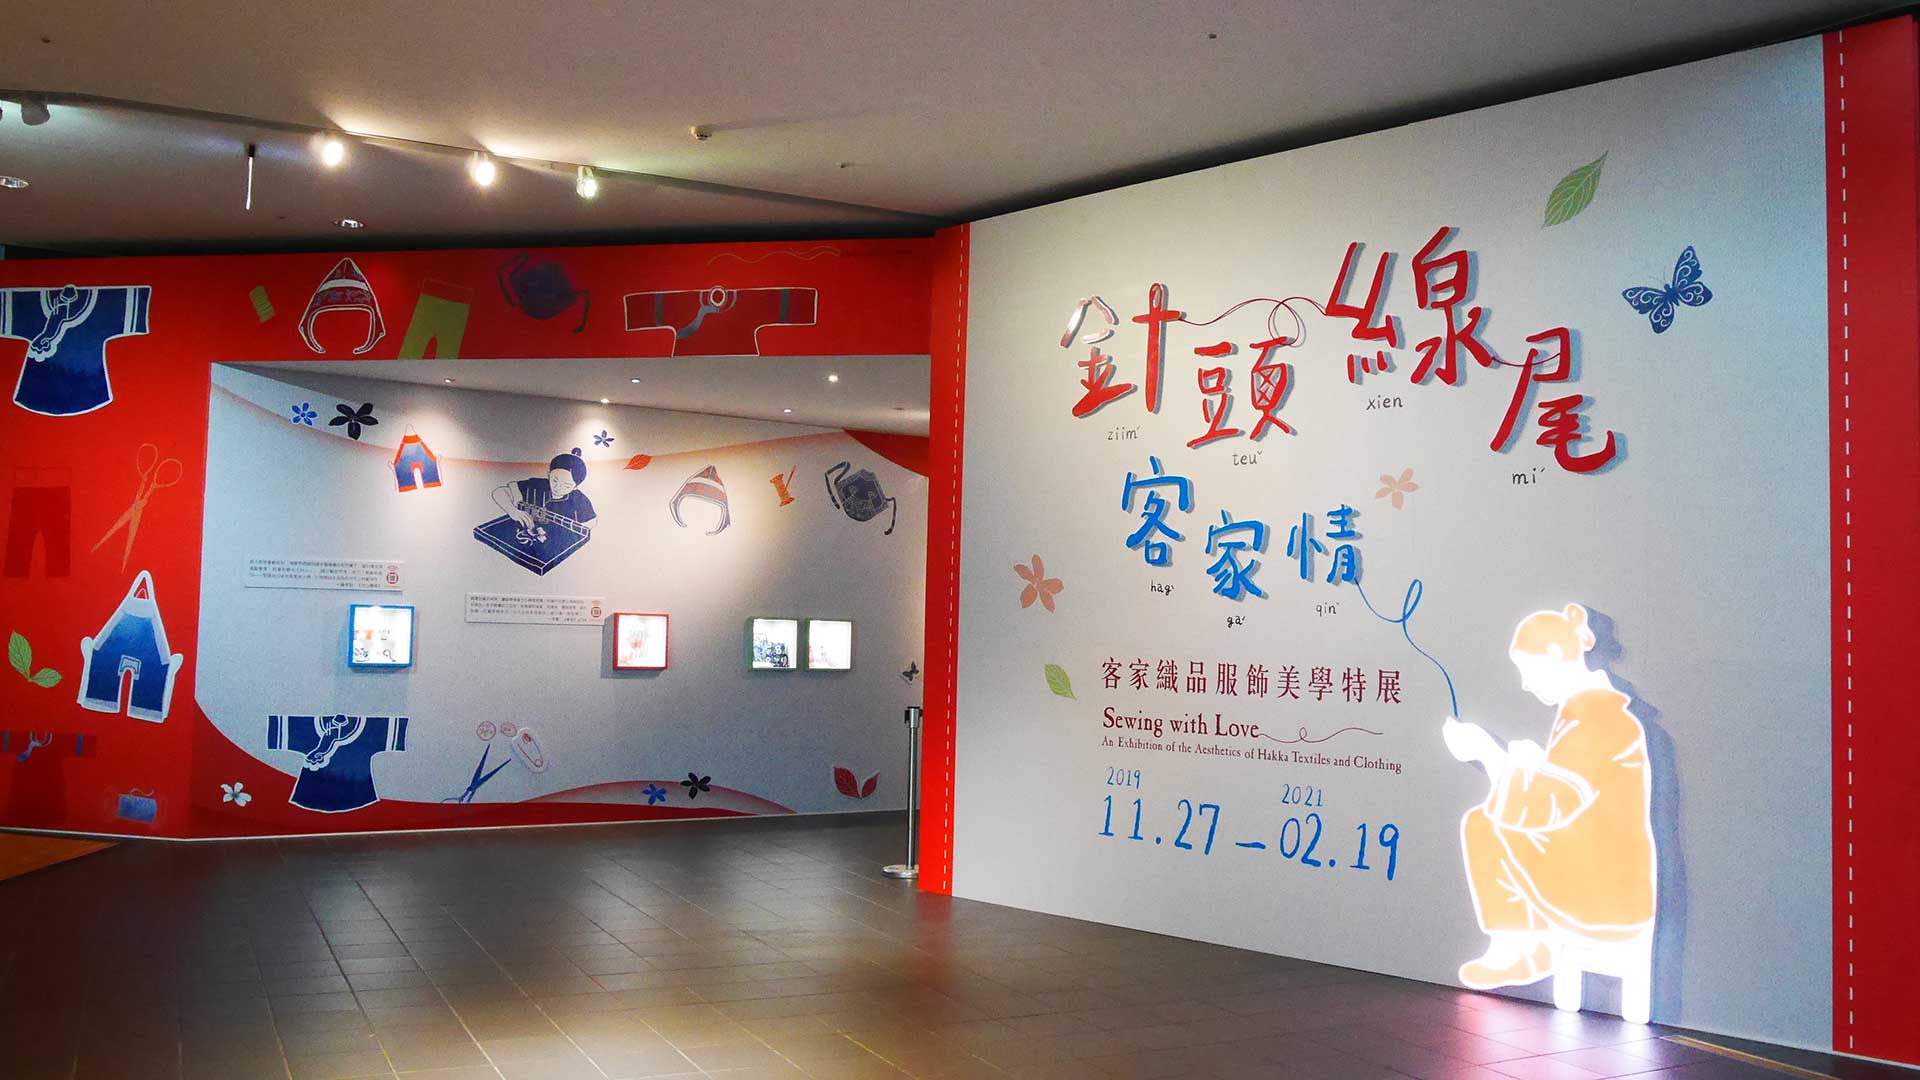 2nd Special Exhibition Hall – Special “Needle and Thread” exhibition: Hakka textiles and clothing aesthetics 主圖